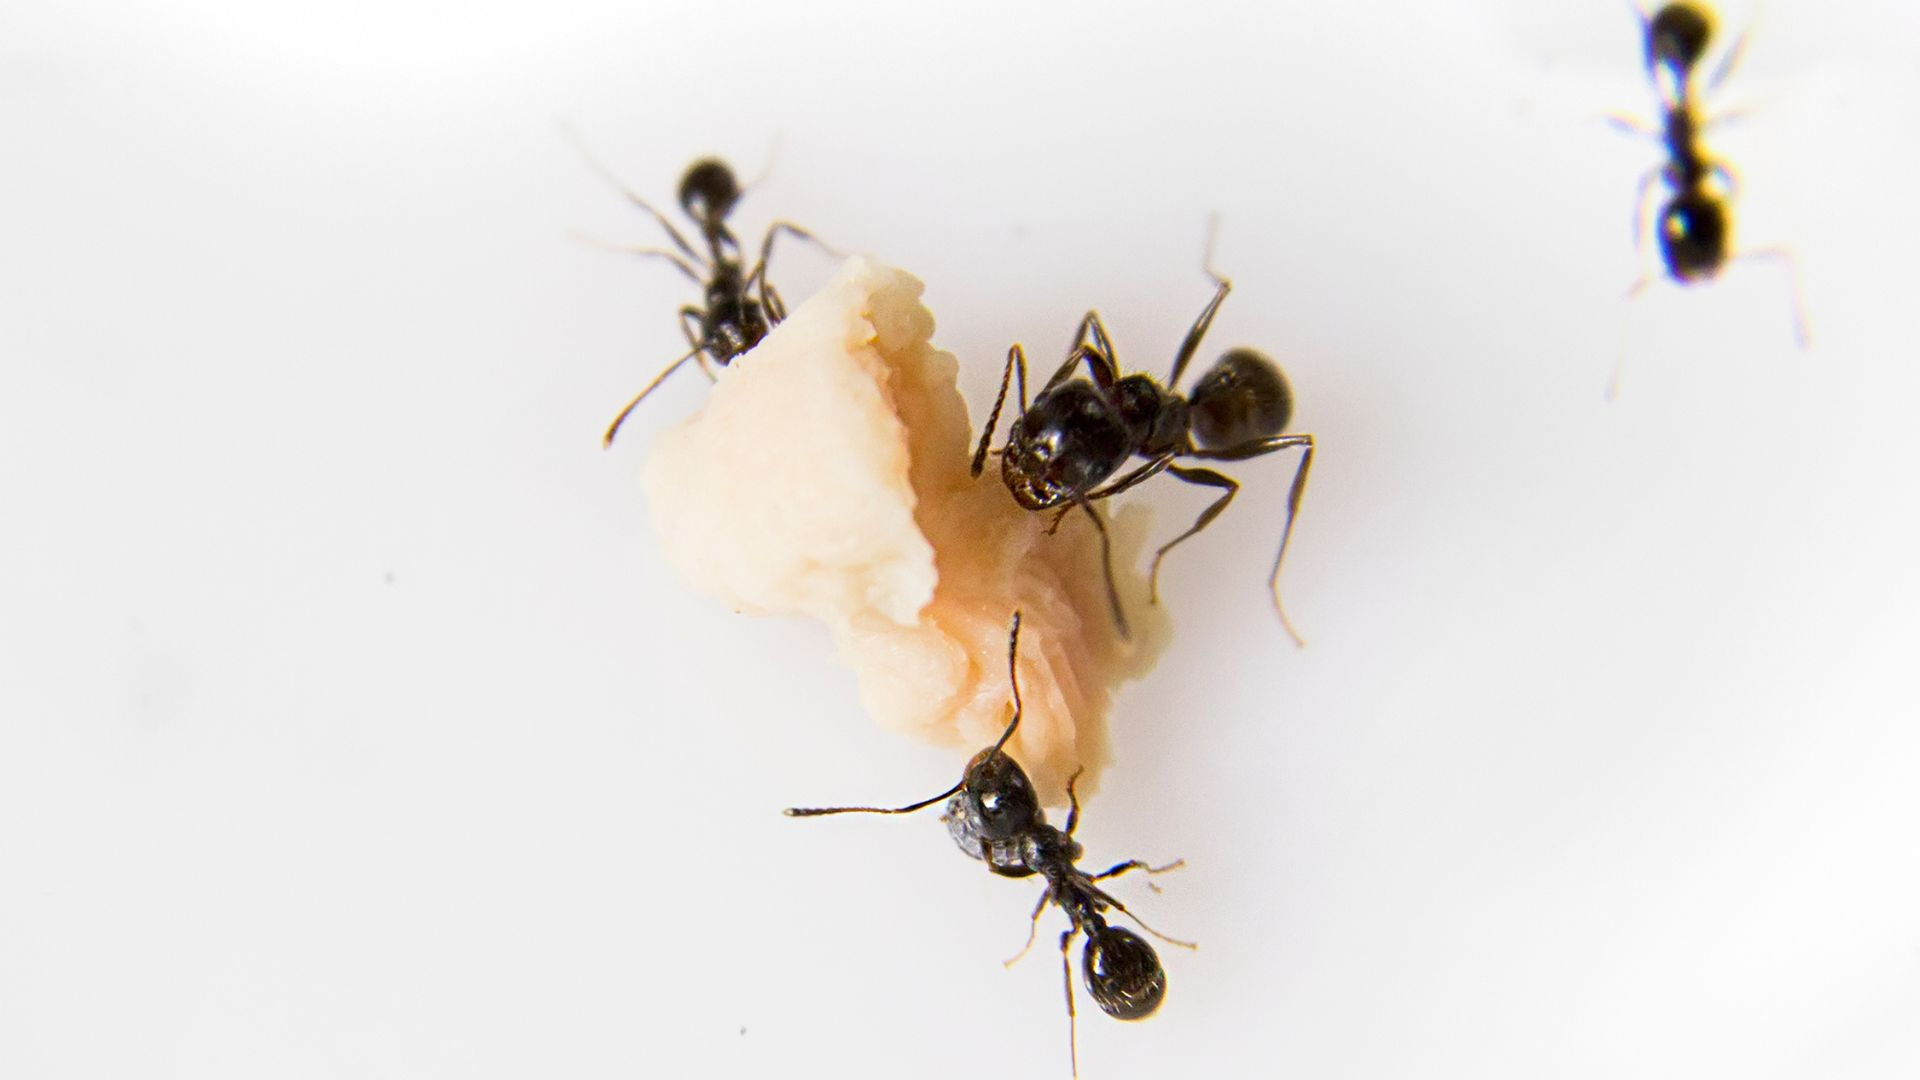 An image of four ants gathering around a piece of food on a white background inside a home.